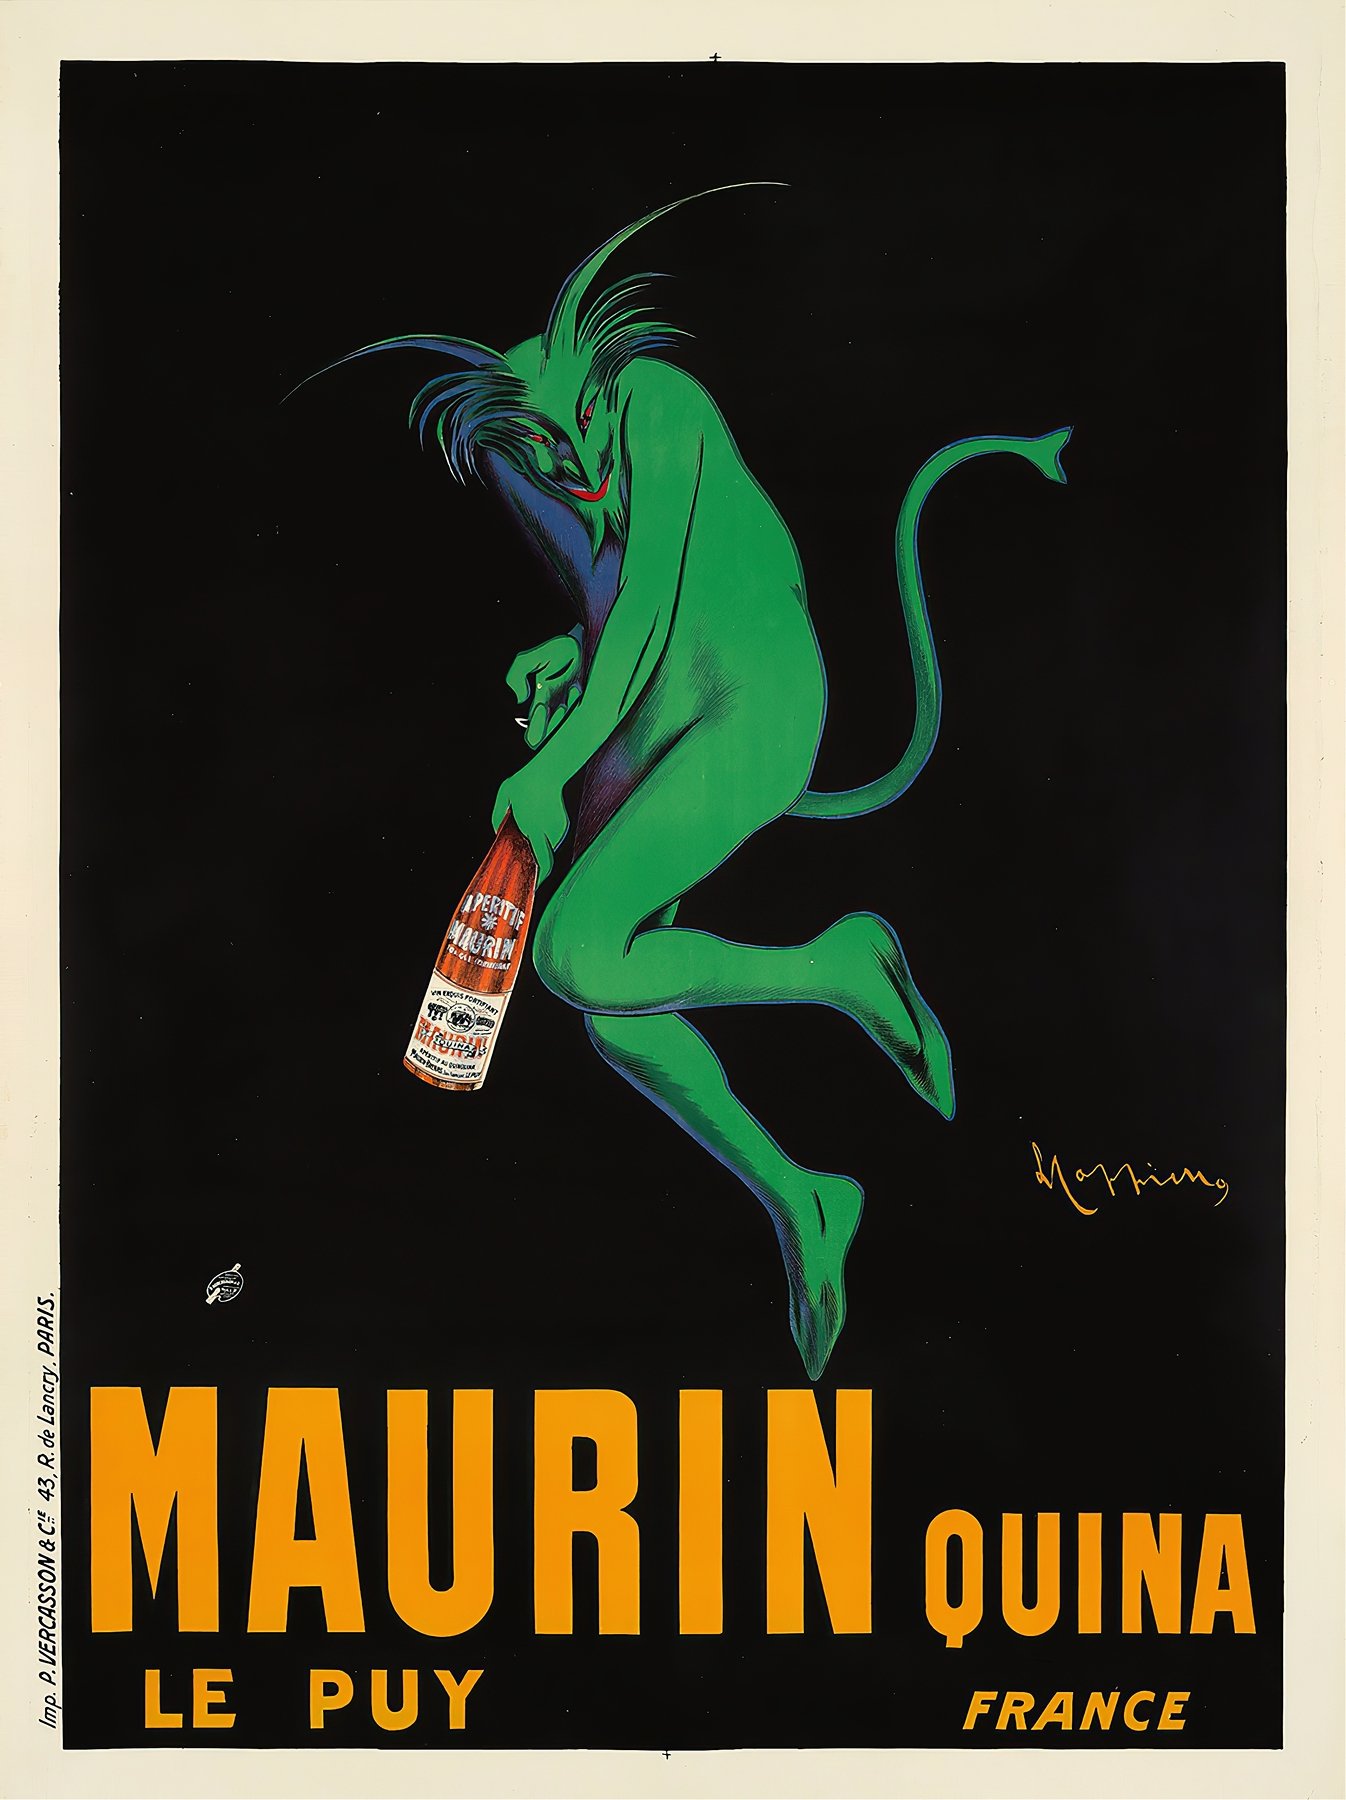 Maurin Quina (1906)